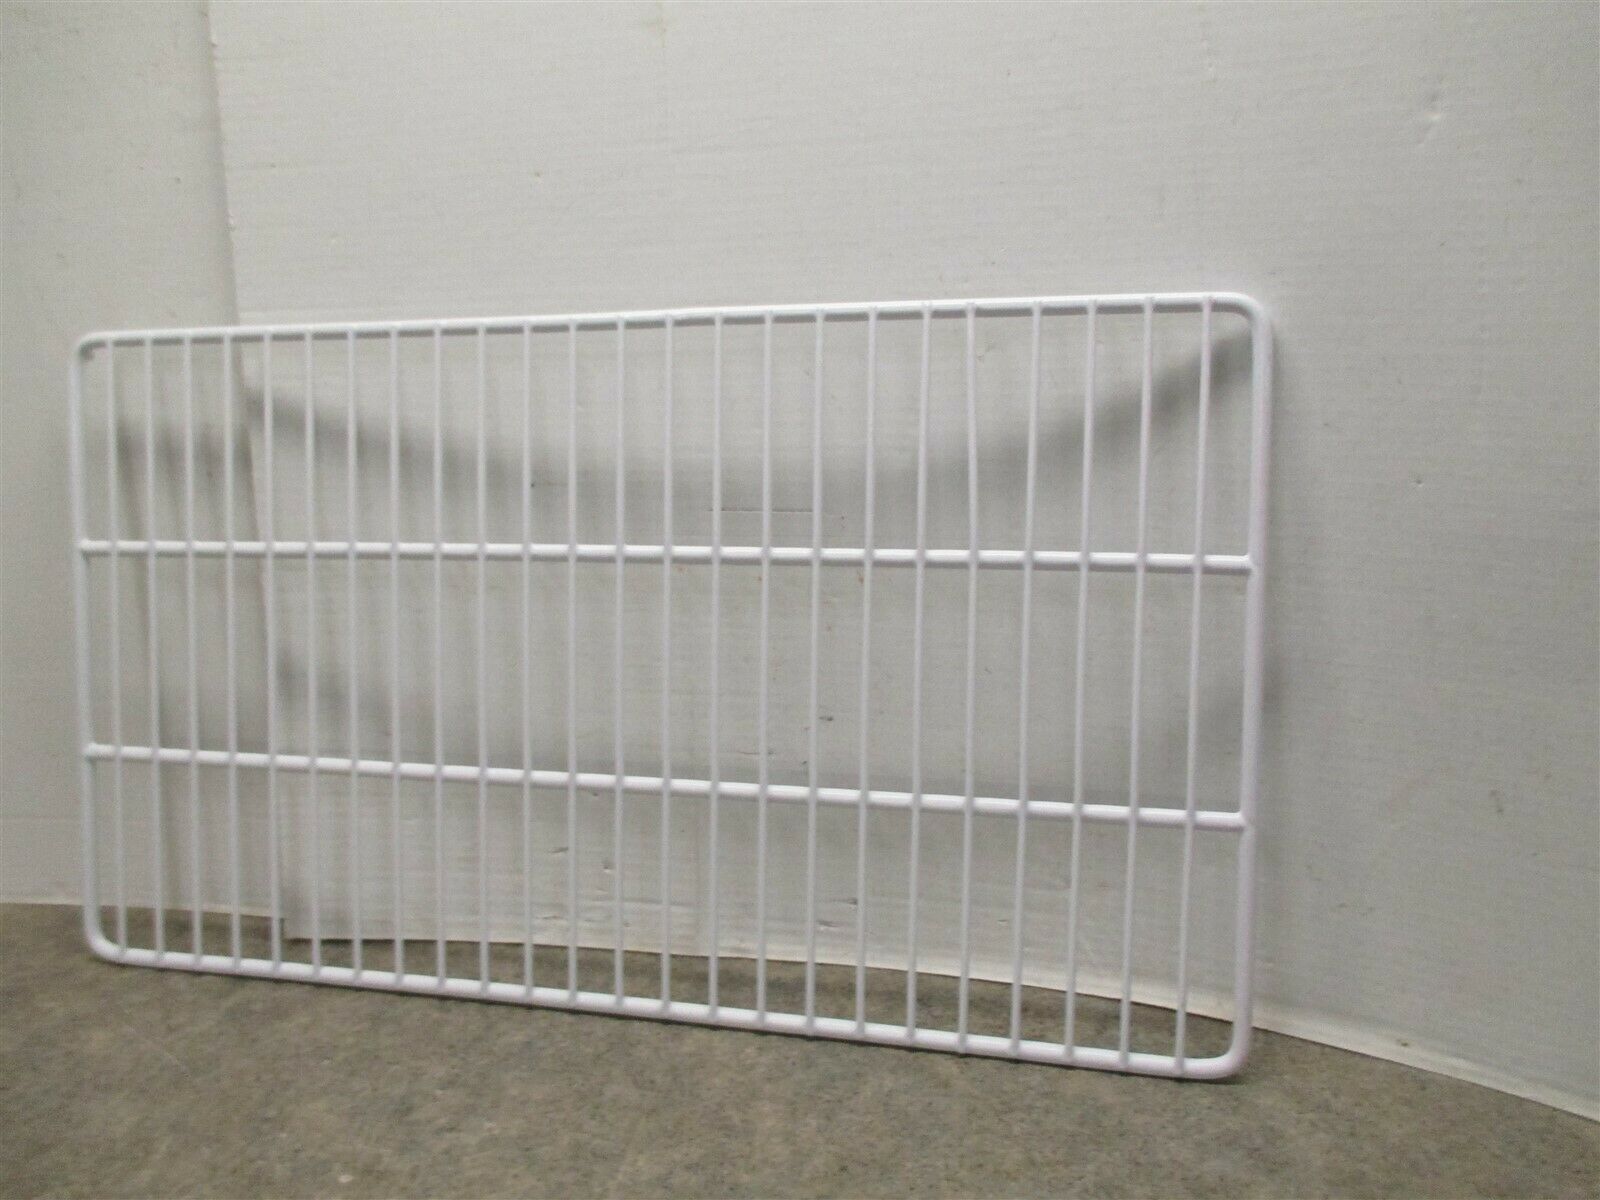 Primary image for KENMORE FREEZER NEW W/OUT BOX PINK PAINT WIRE SHELF (3 SLOTS) 30178-0048600-00